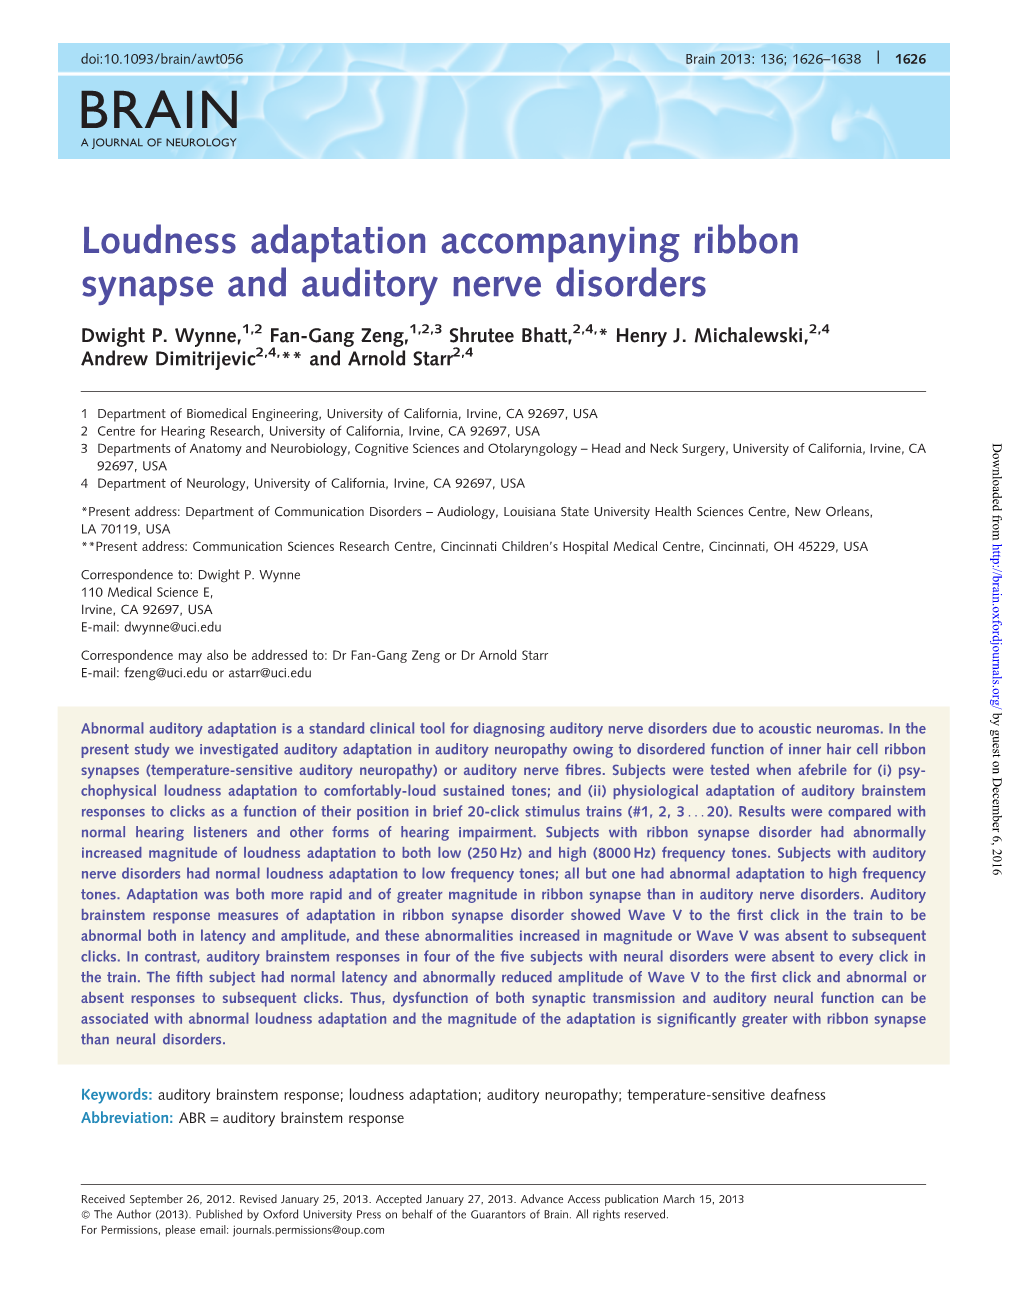 Loudness Adaptation Accompanying Ribbon Synapse and Auditory Nerve Disorders